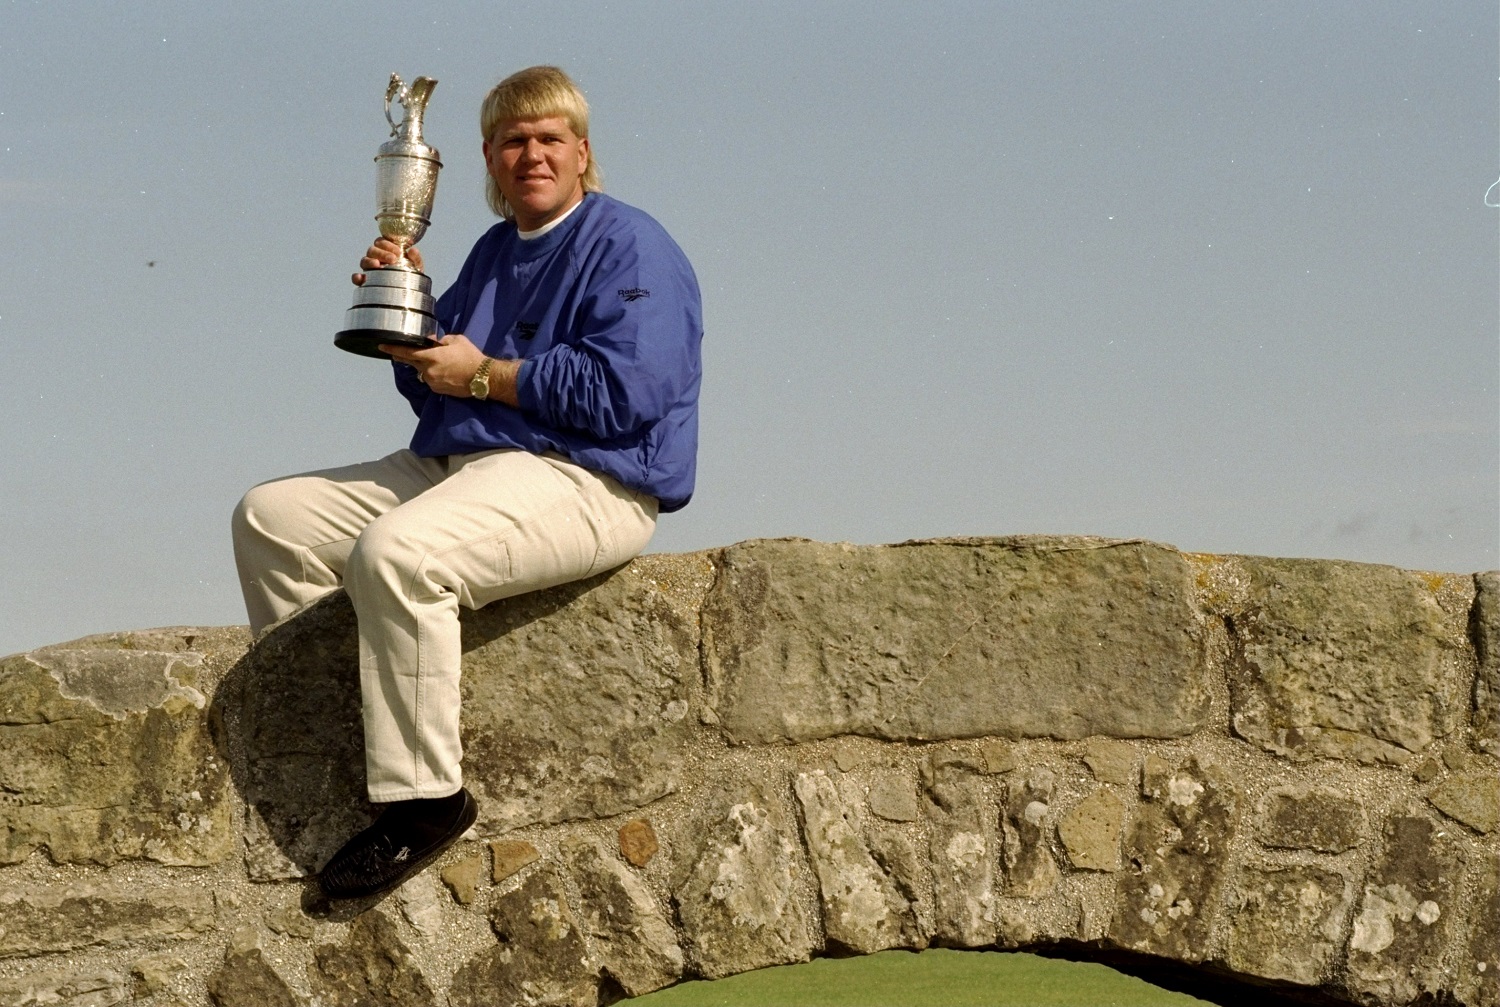 John Daly holds the Claret Jug after the 1995 British Open at St. Andrews Golf Club.